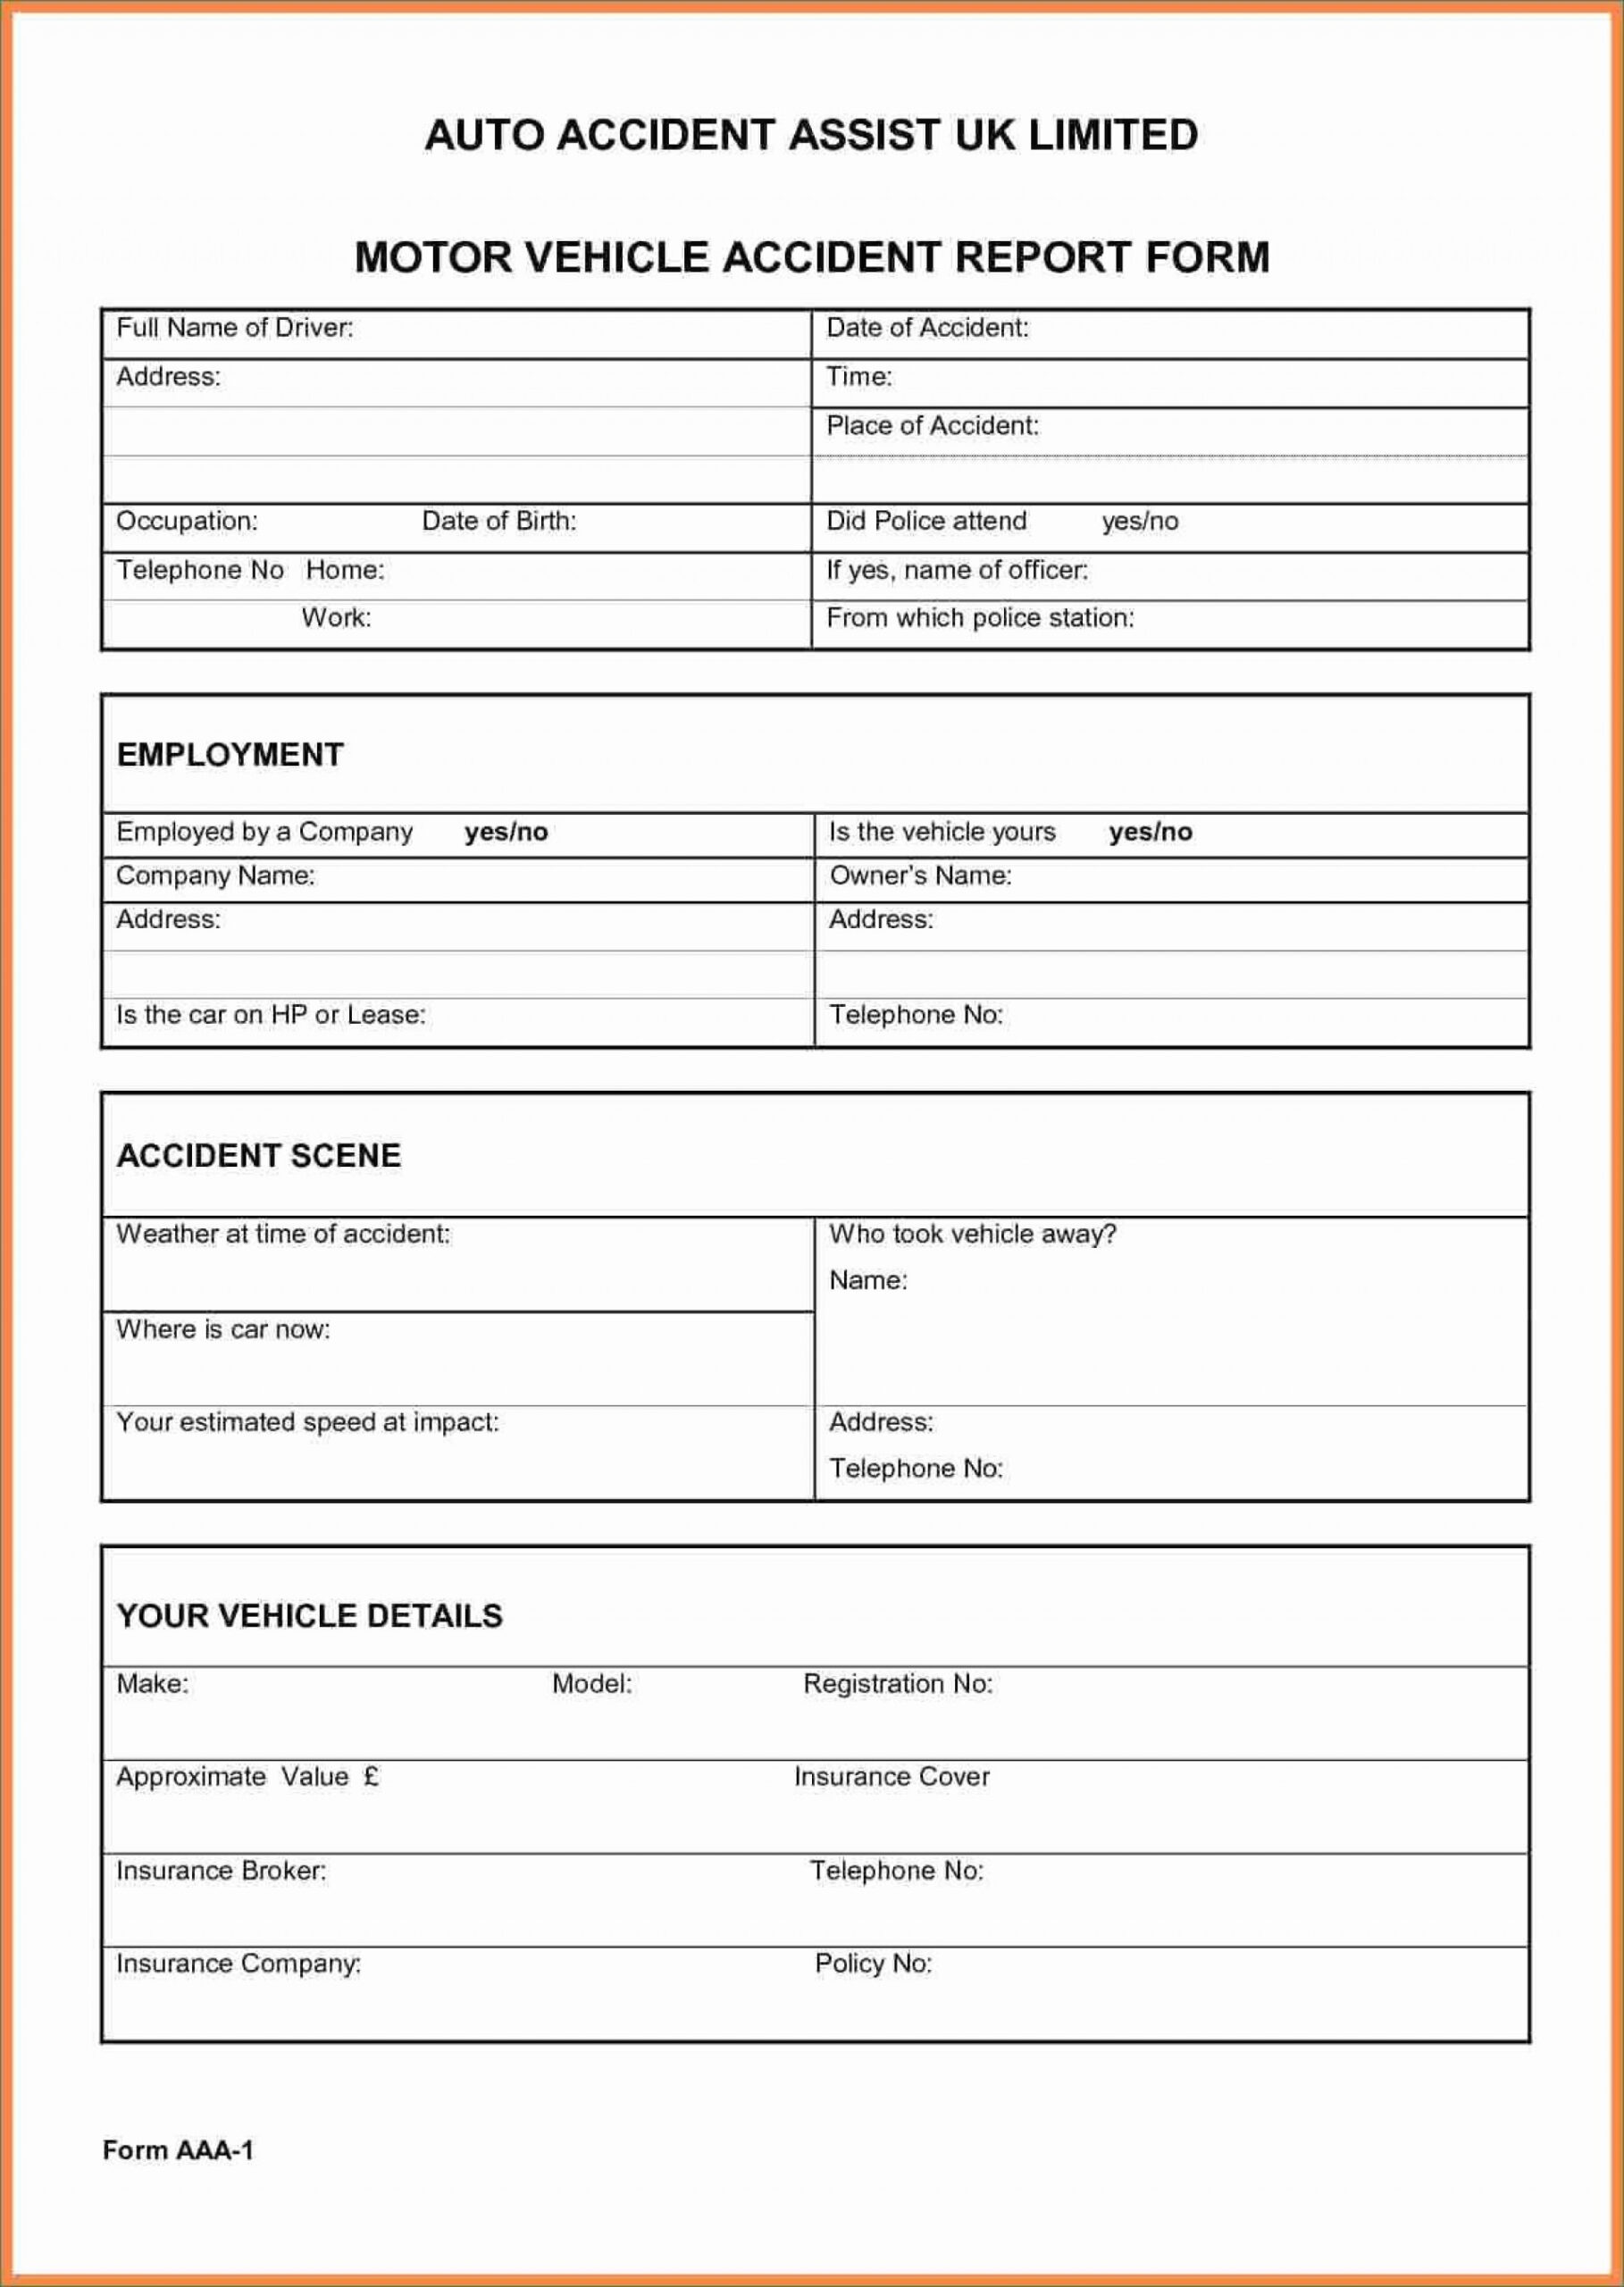 Phenomenal Automobile Accident Report Form Template Ideas In Motor Vehicle Accident Report Form Template